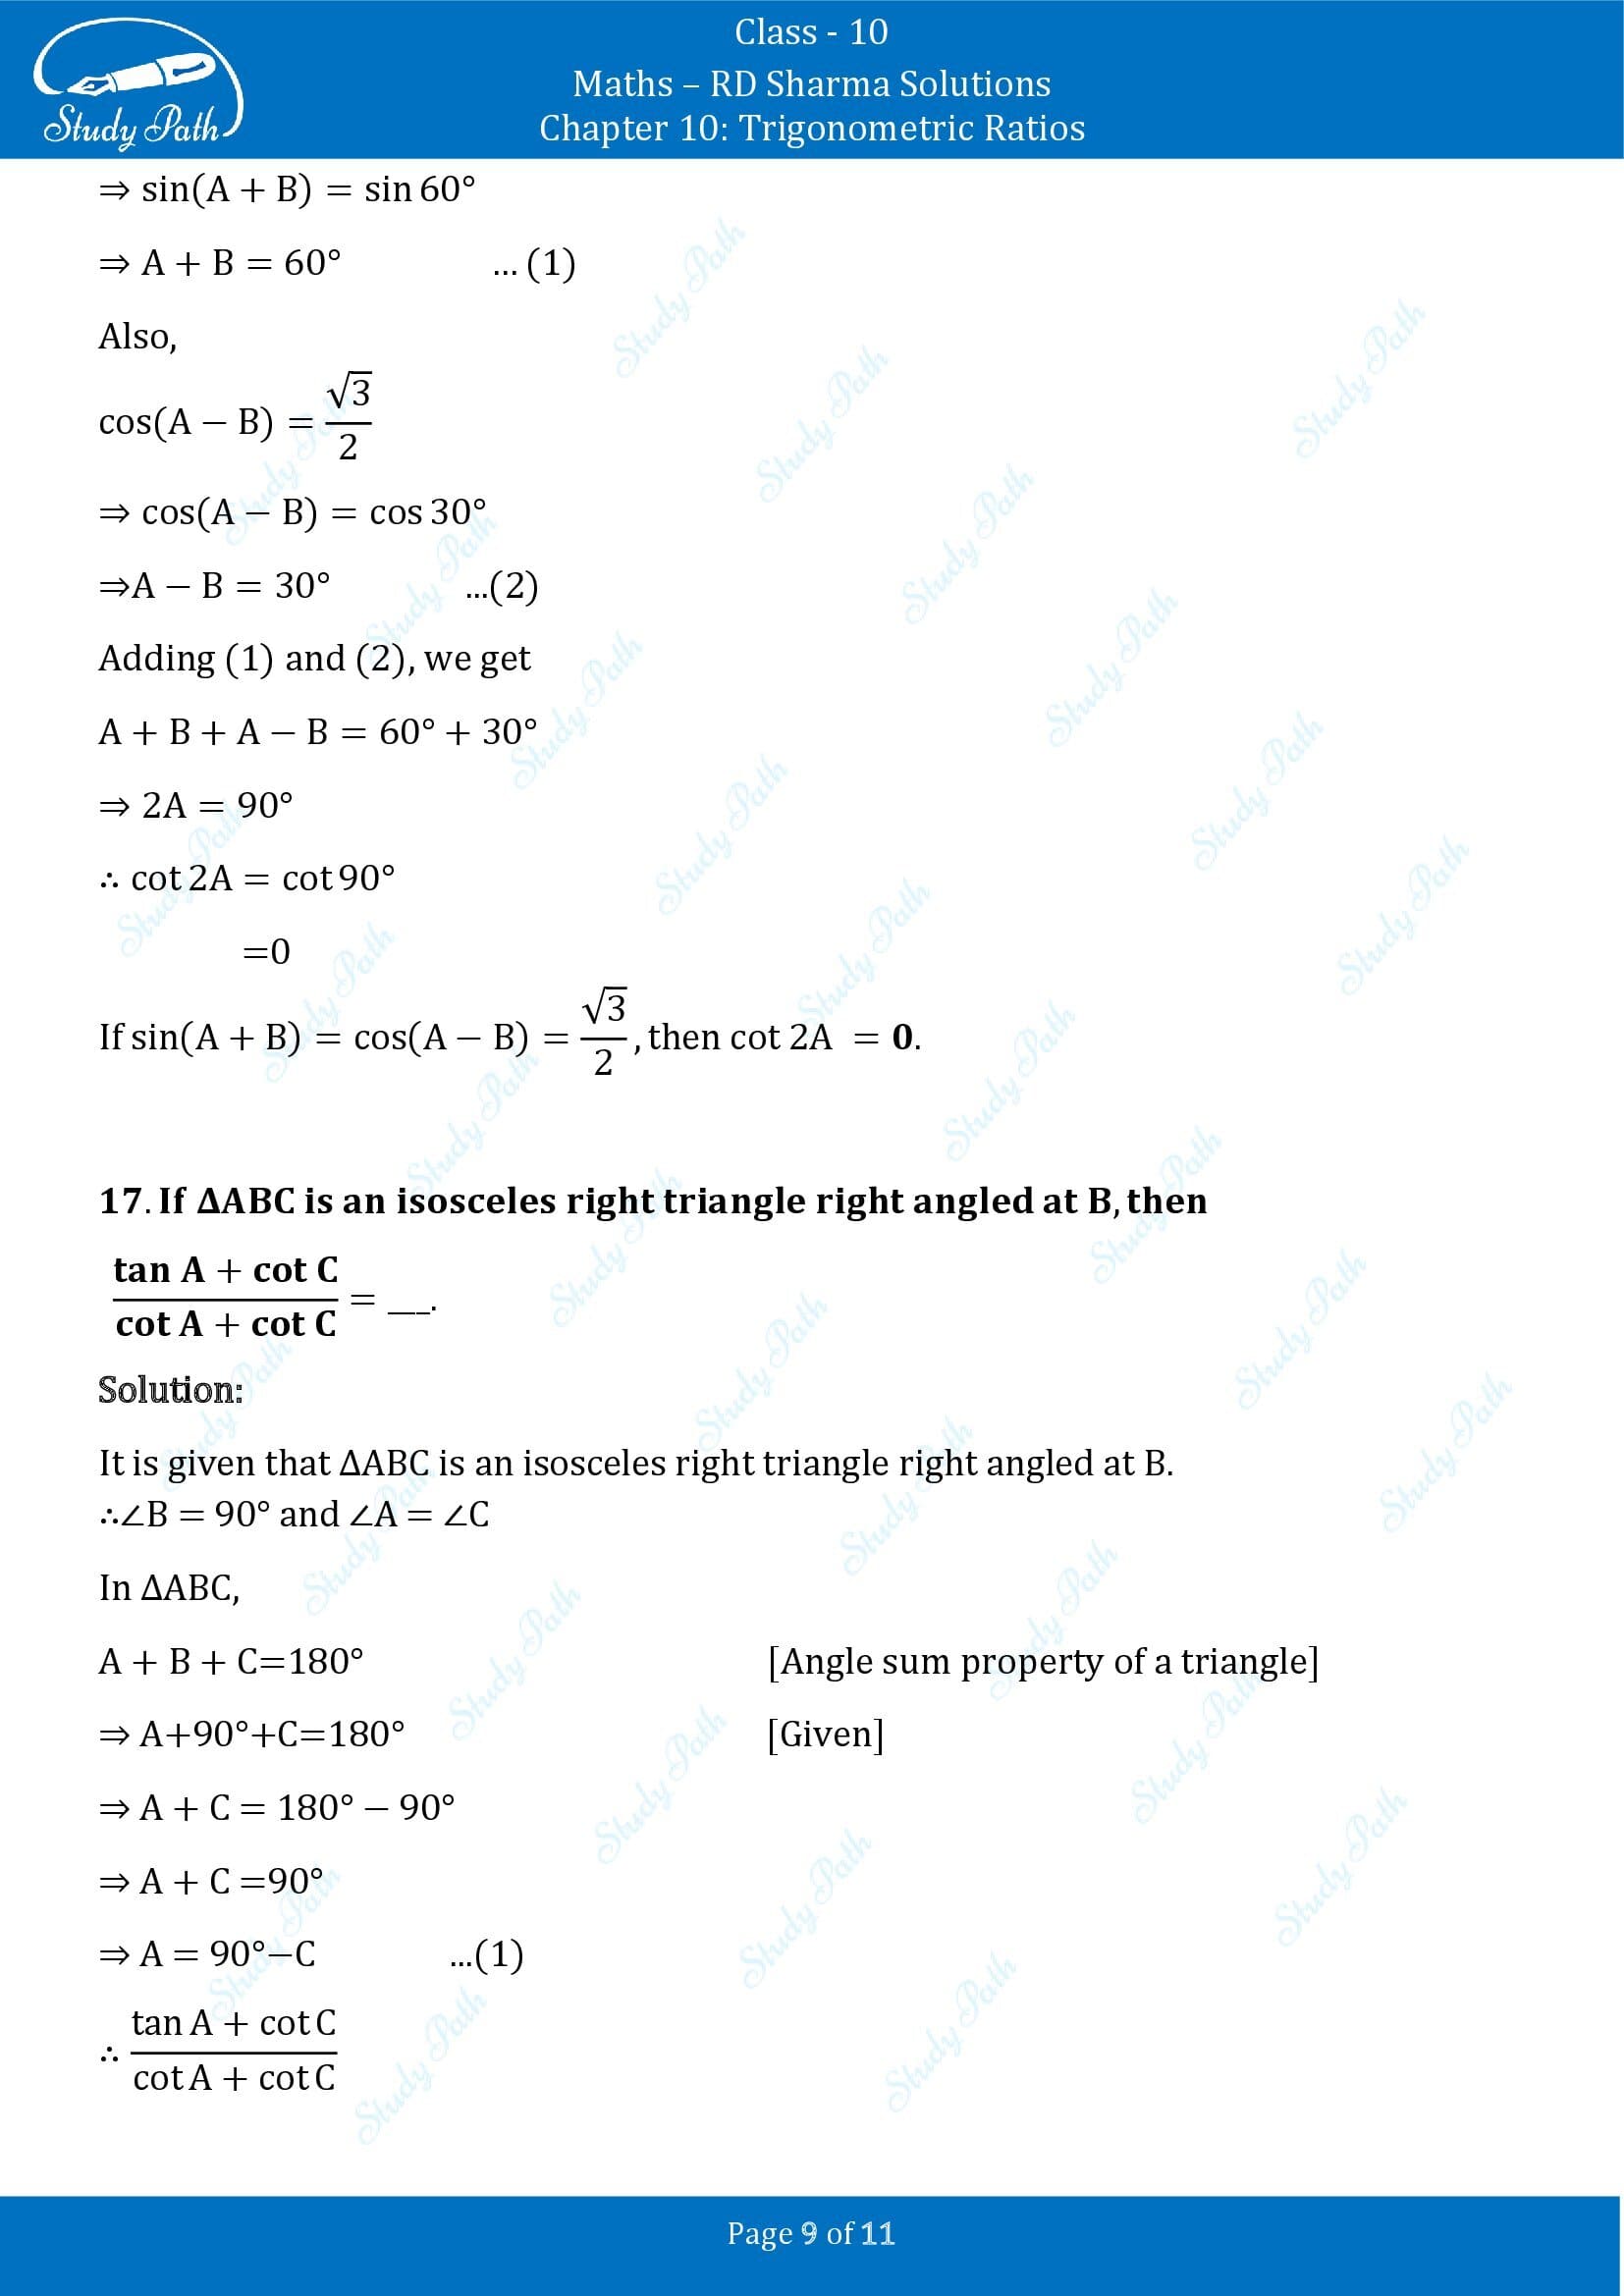 RD Sharma Solutions Class 10 Chapter 10 Trigonometric Ratios Fill in the Blank Type Questions FBQs 00009